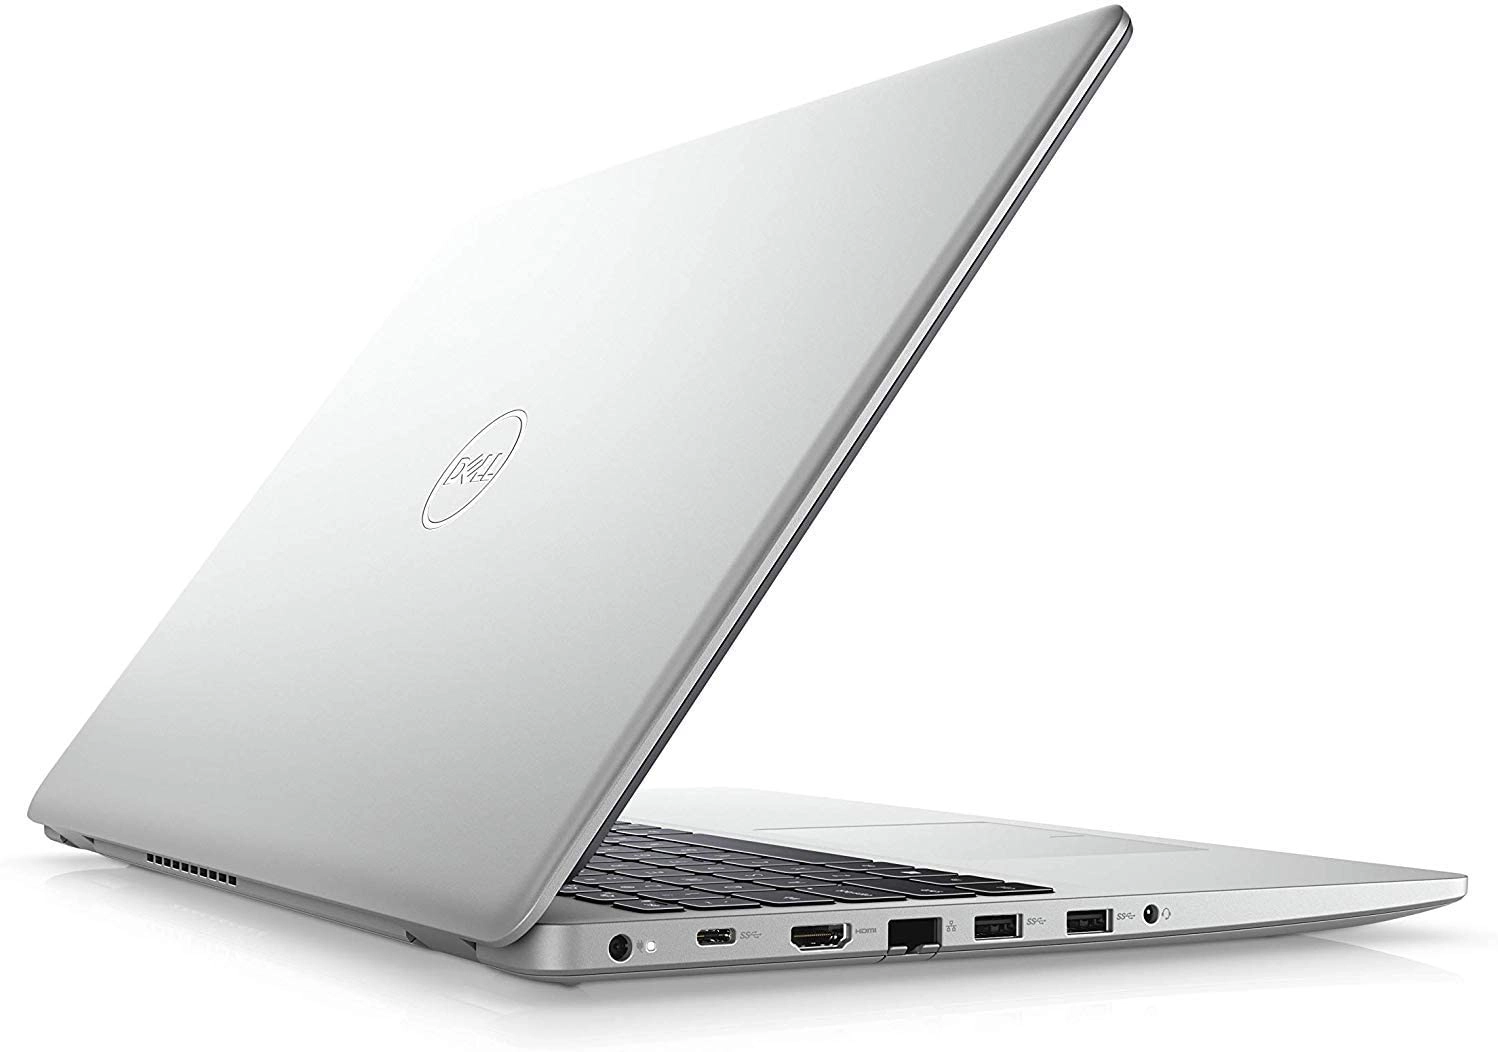 Dell Inspiron 15 laptop image